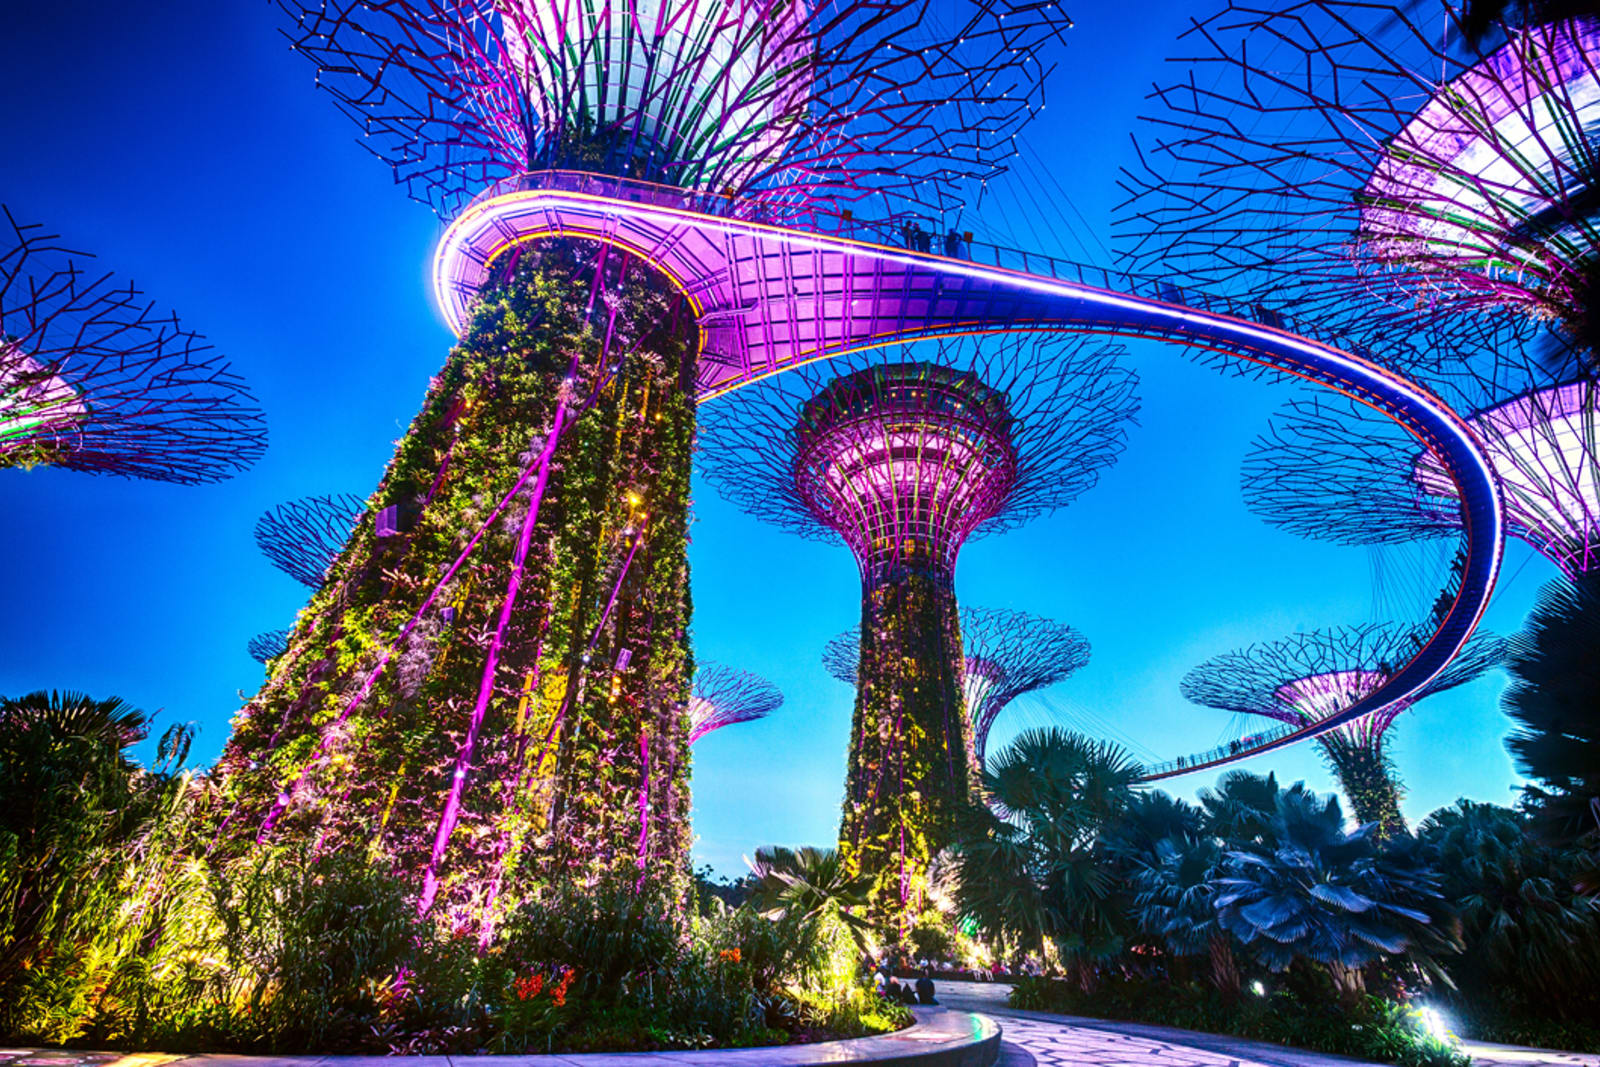 The Supertree Observatory at Gardens by the Bay in Singapore